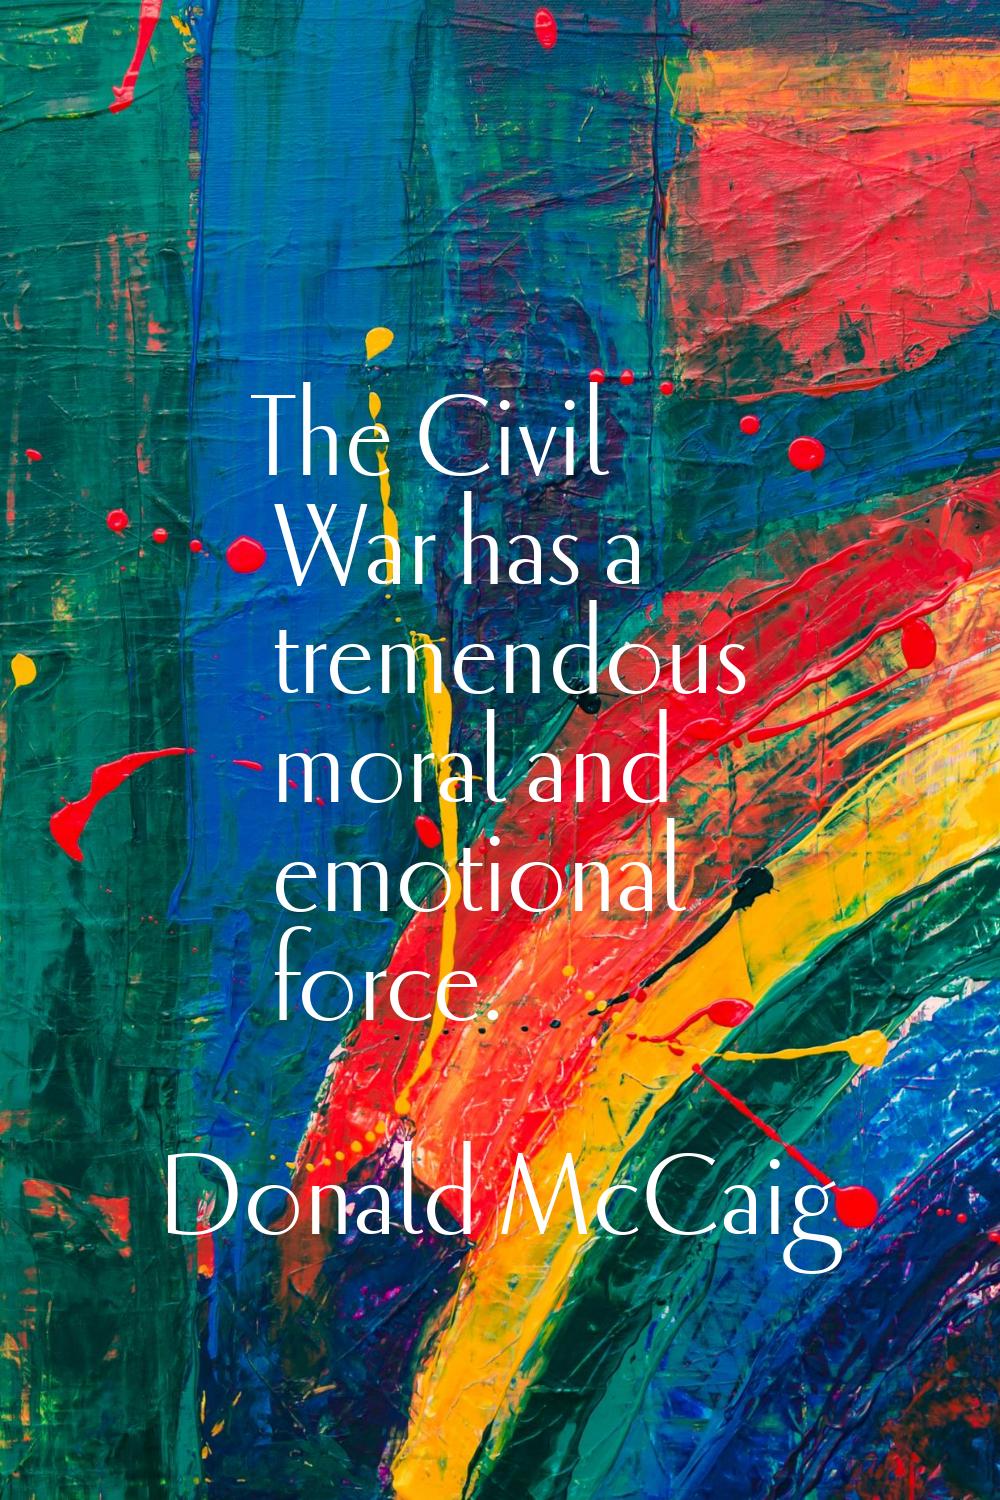 The Civil War has a tremendous moral and emotional force.